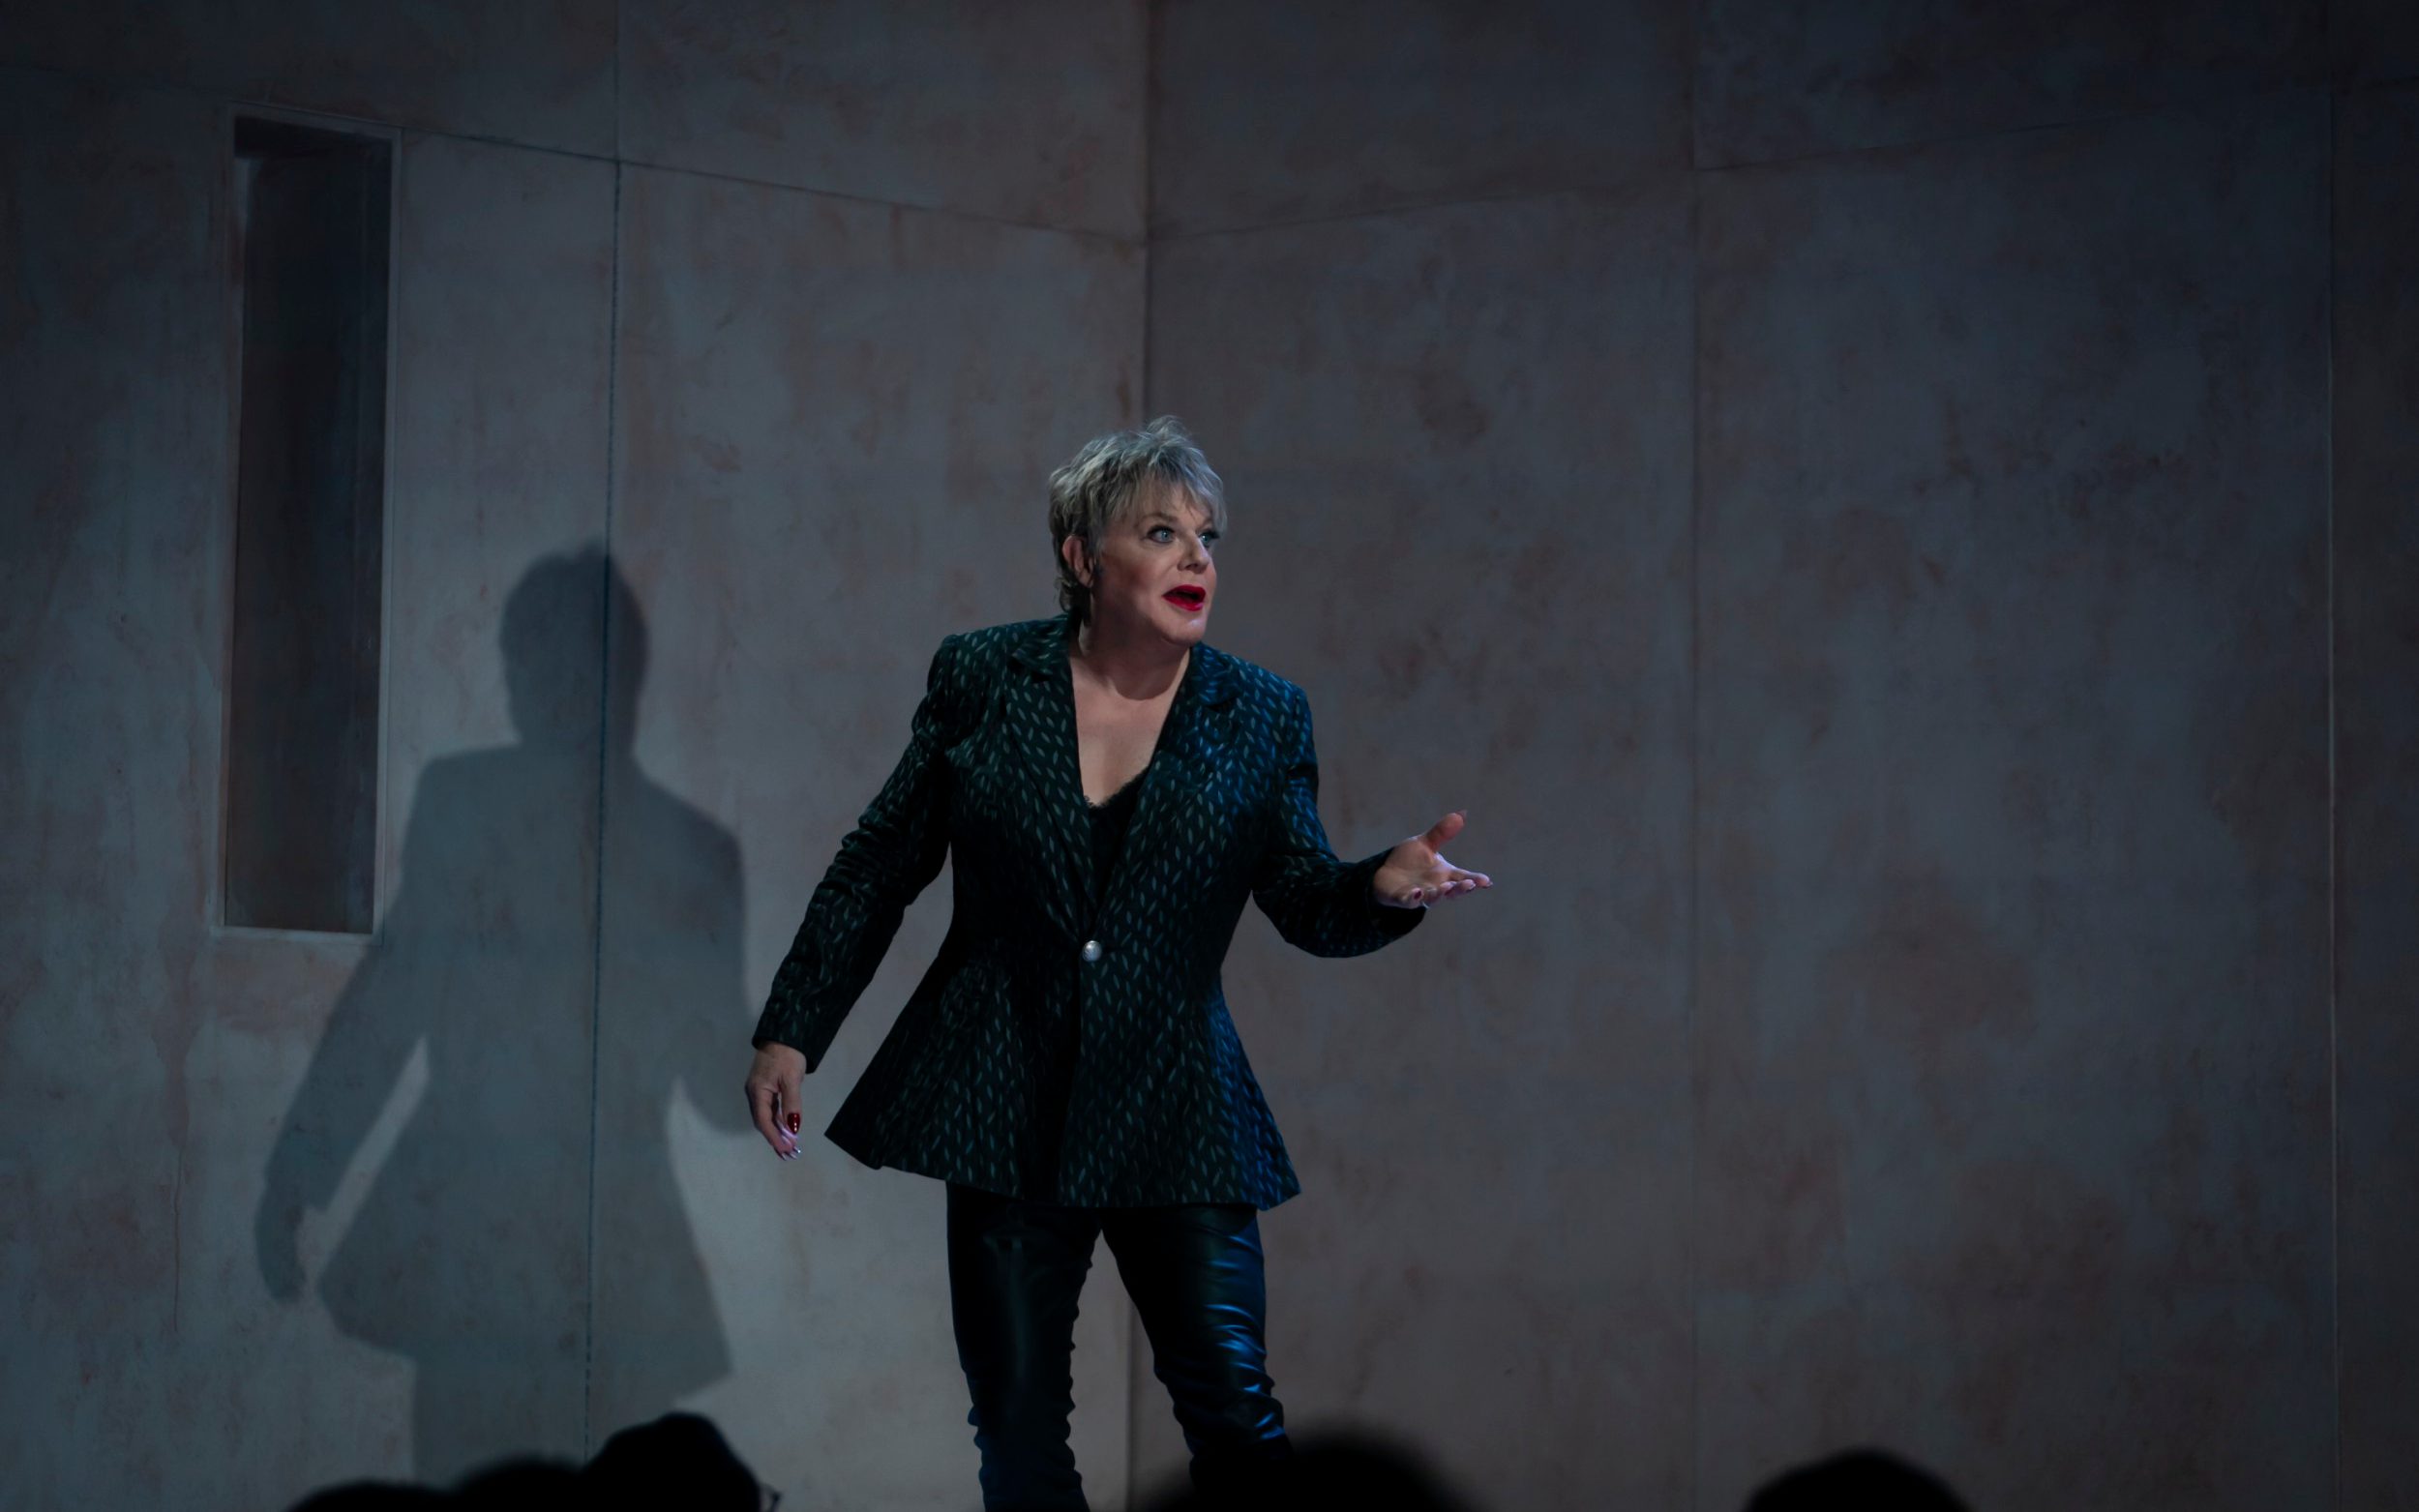 eddie izzard’s solo hamlet is an endurance test – taking on all the roles with wit and subtlety